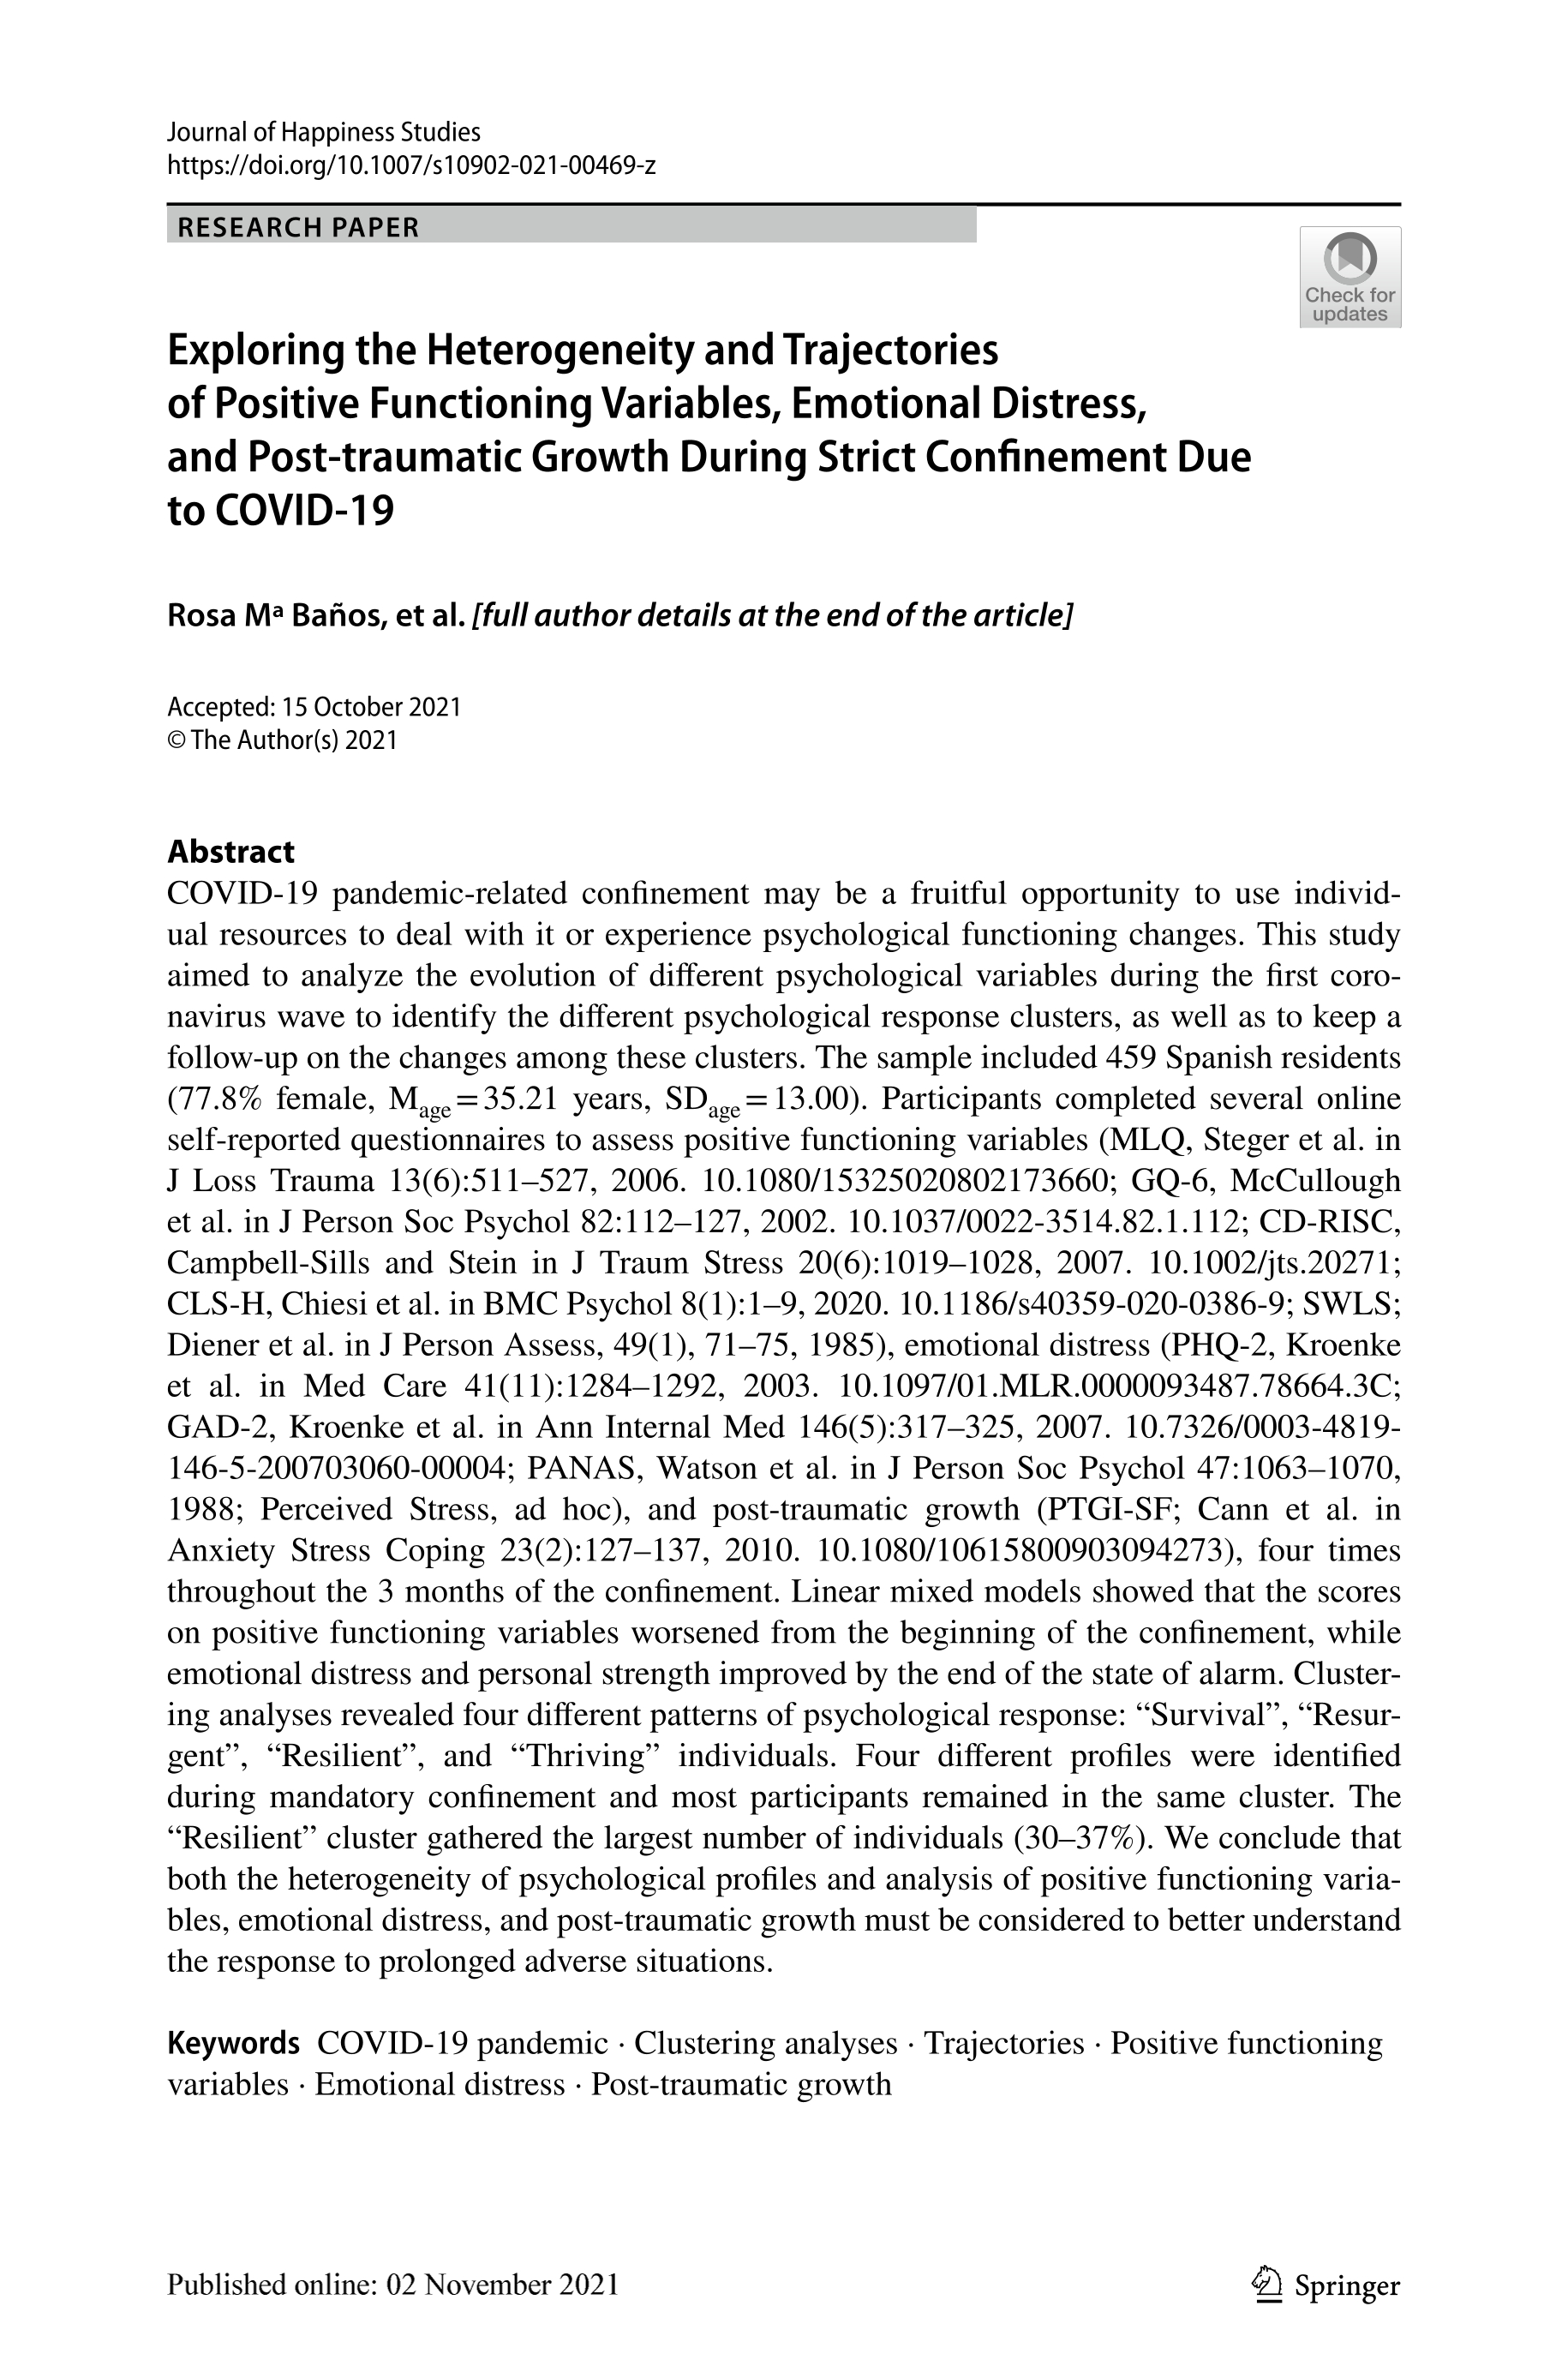 Exploring the Heterogeneity and Trajectories of Positive Functioning Variables, Emotional Distress, and Post-traumatic Growth During Strict Confinement Due to COVID-19